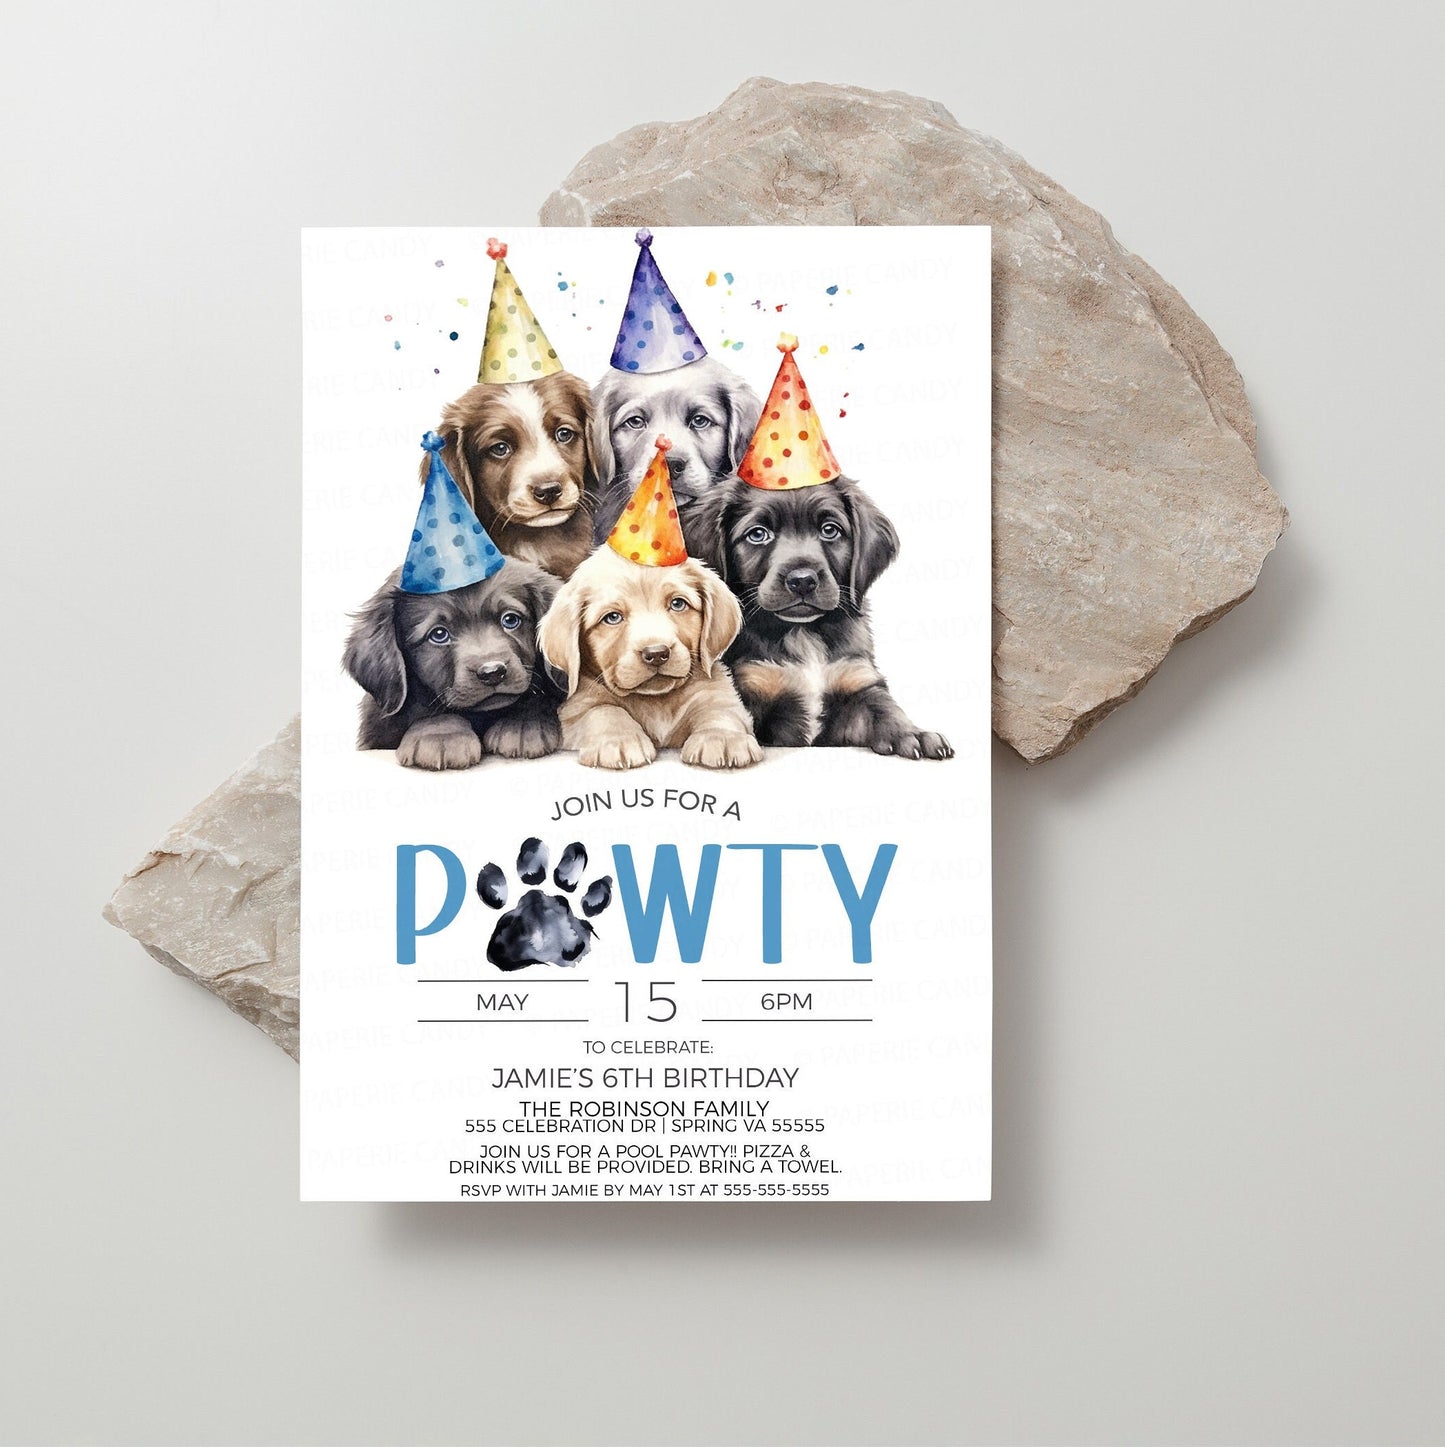 Puppy Invitation, Puppy Pawty Invite, Puppy Dog Birthday Party, Let's Pawty, Calling All Pawty Animals, Editable Printable Template